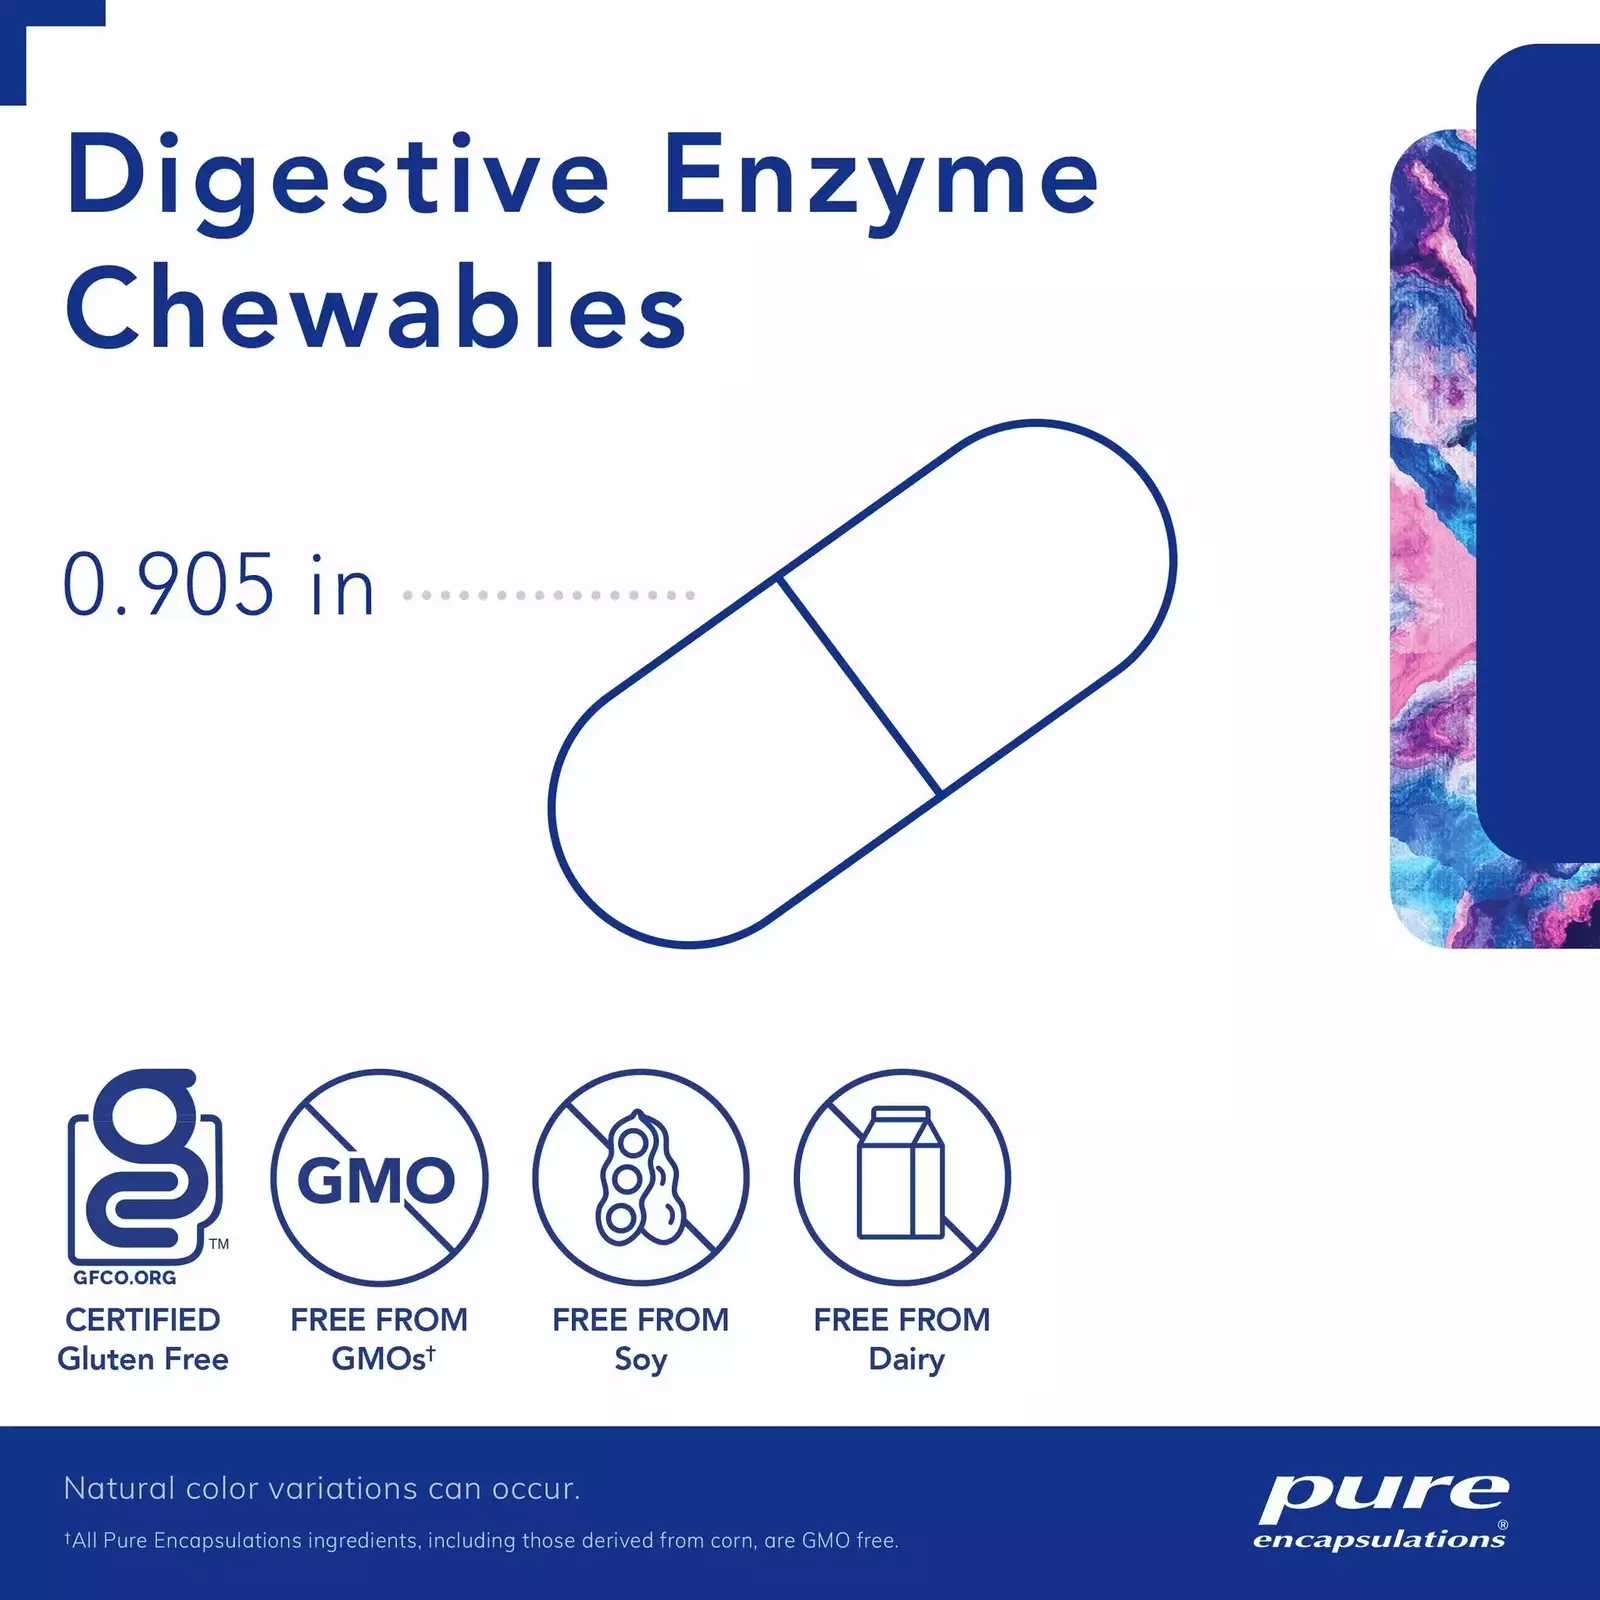 Digestive Enzyme Chewables